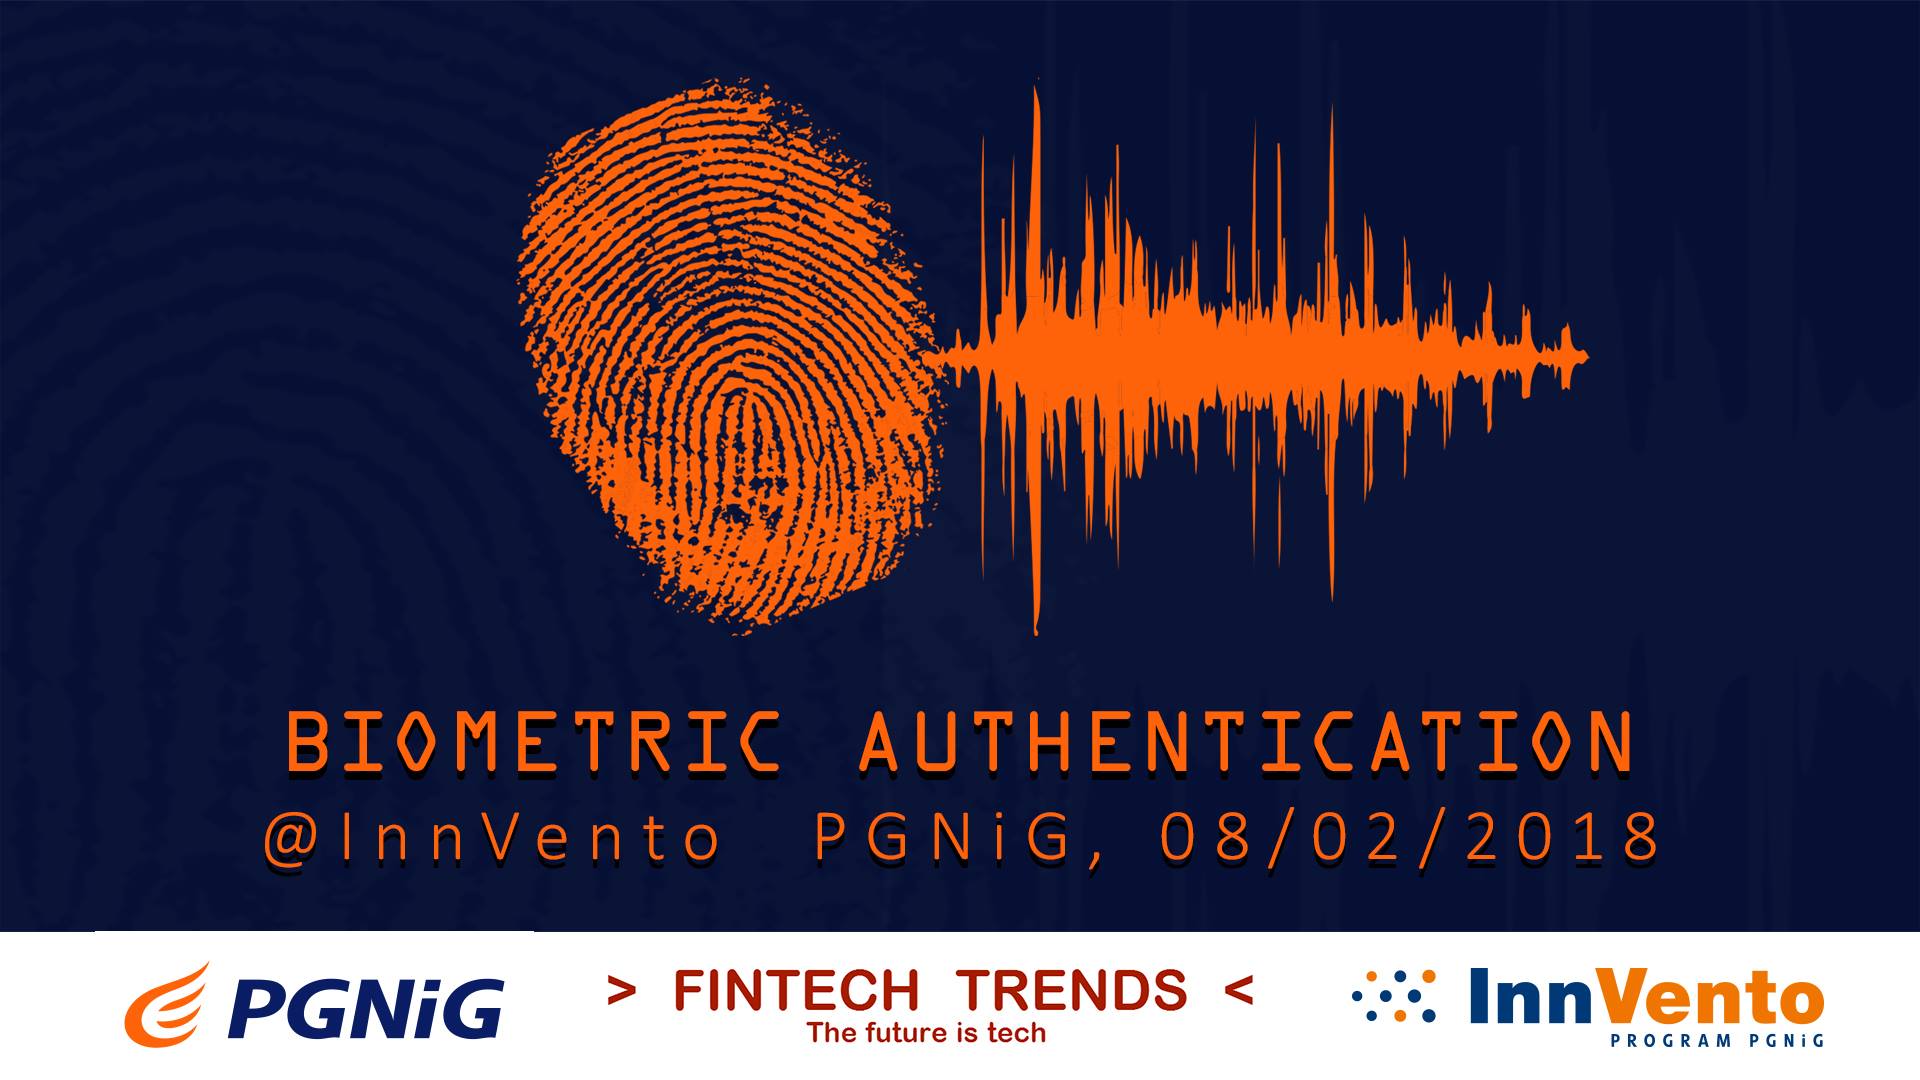 FintechTrends.co Invites You To Discuss All Things Biometric Authentication